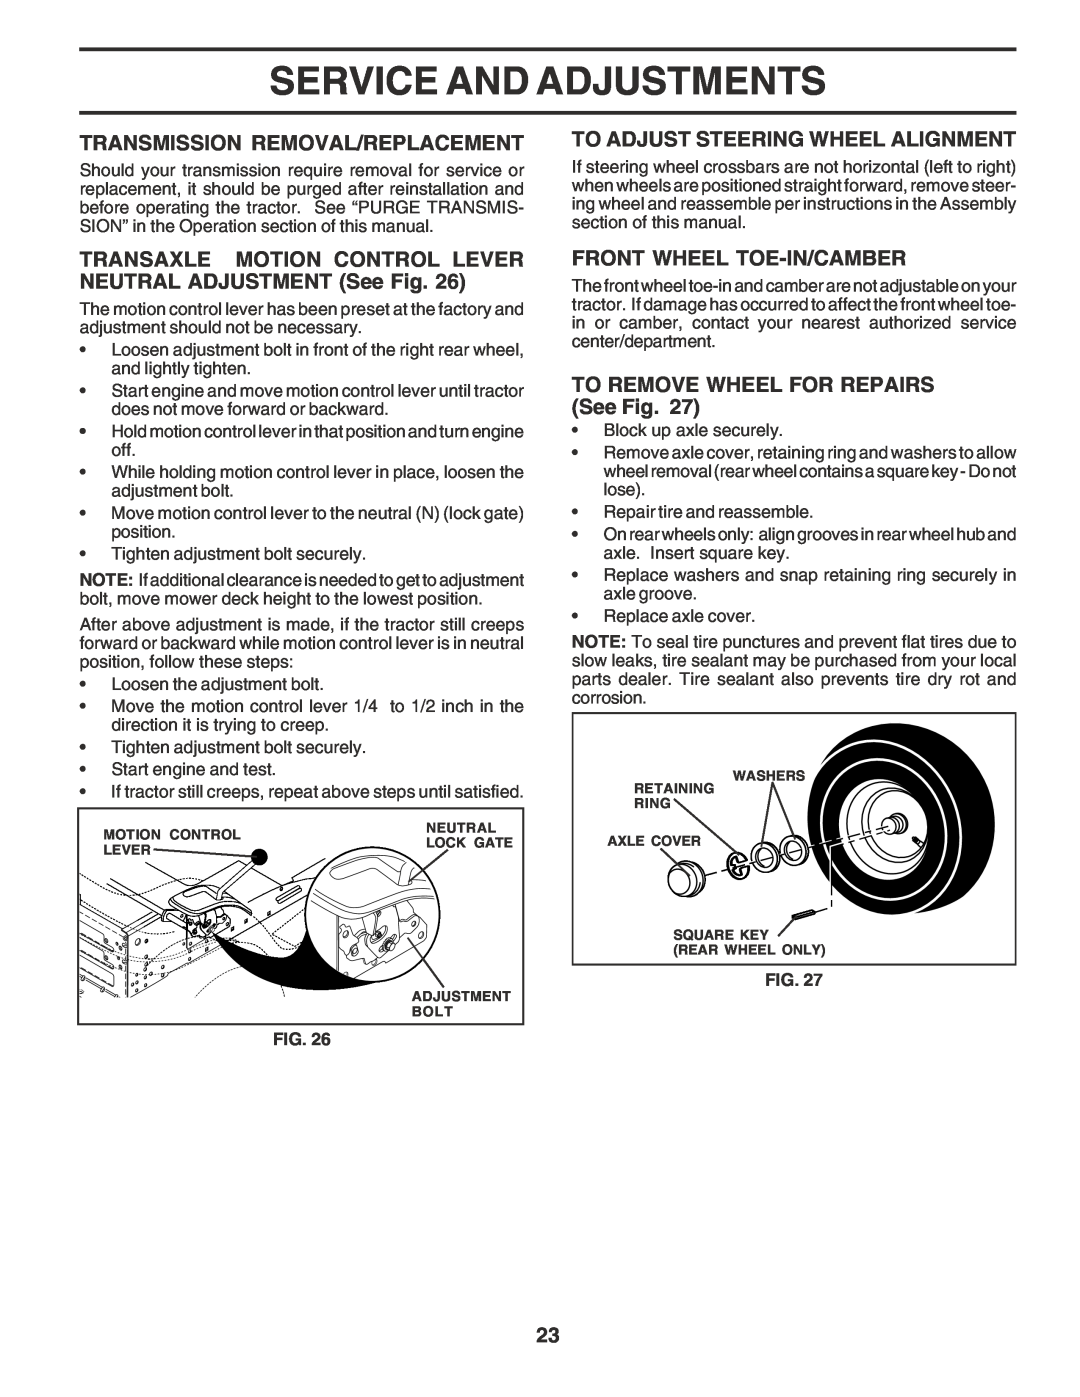 Poulan PR185H42STH Transmission Removal/Replacement, To Adjust Steering Wheel Alignment, Front Wheel Toe-In/Camber 